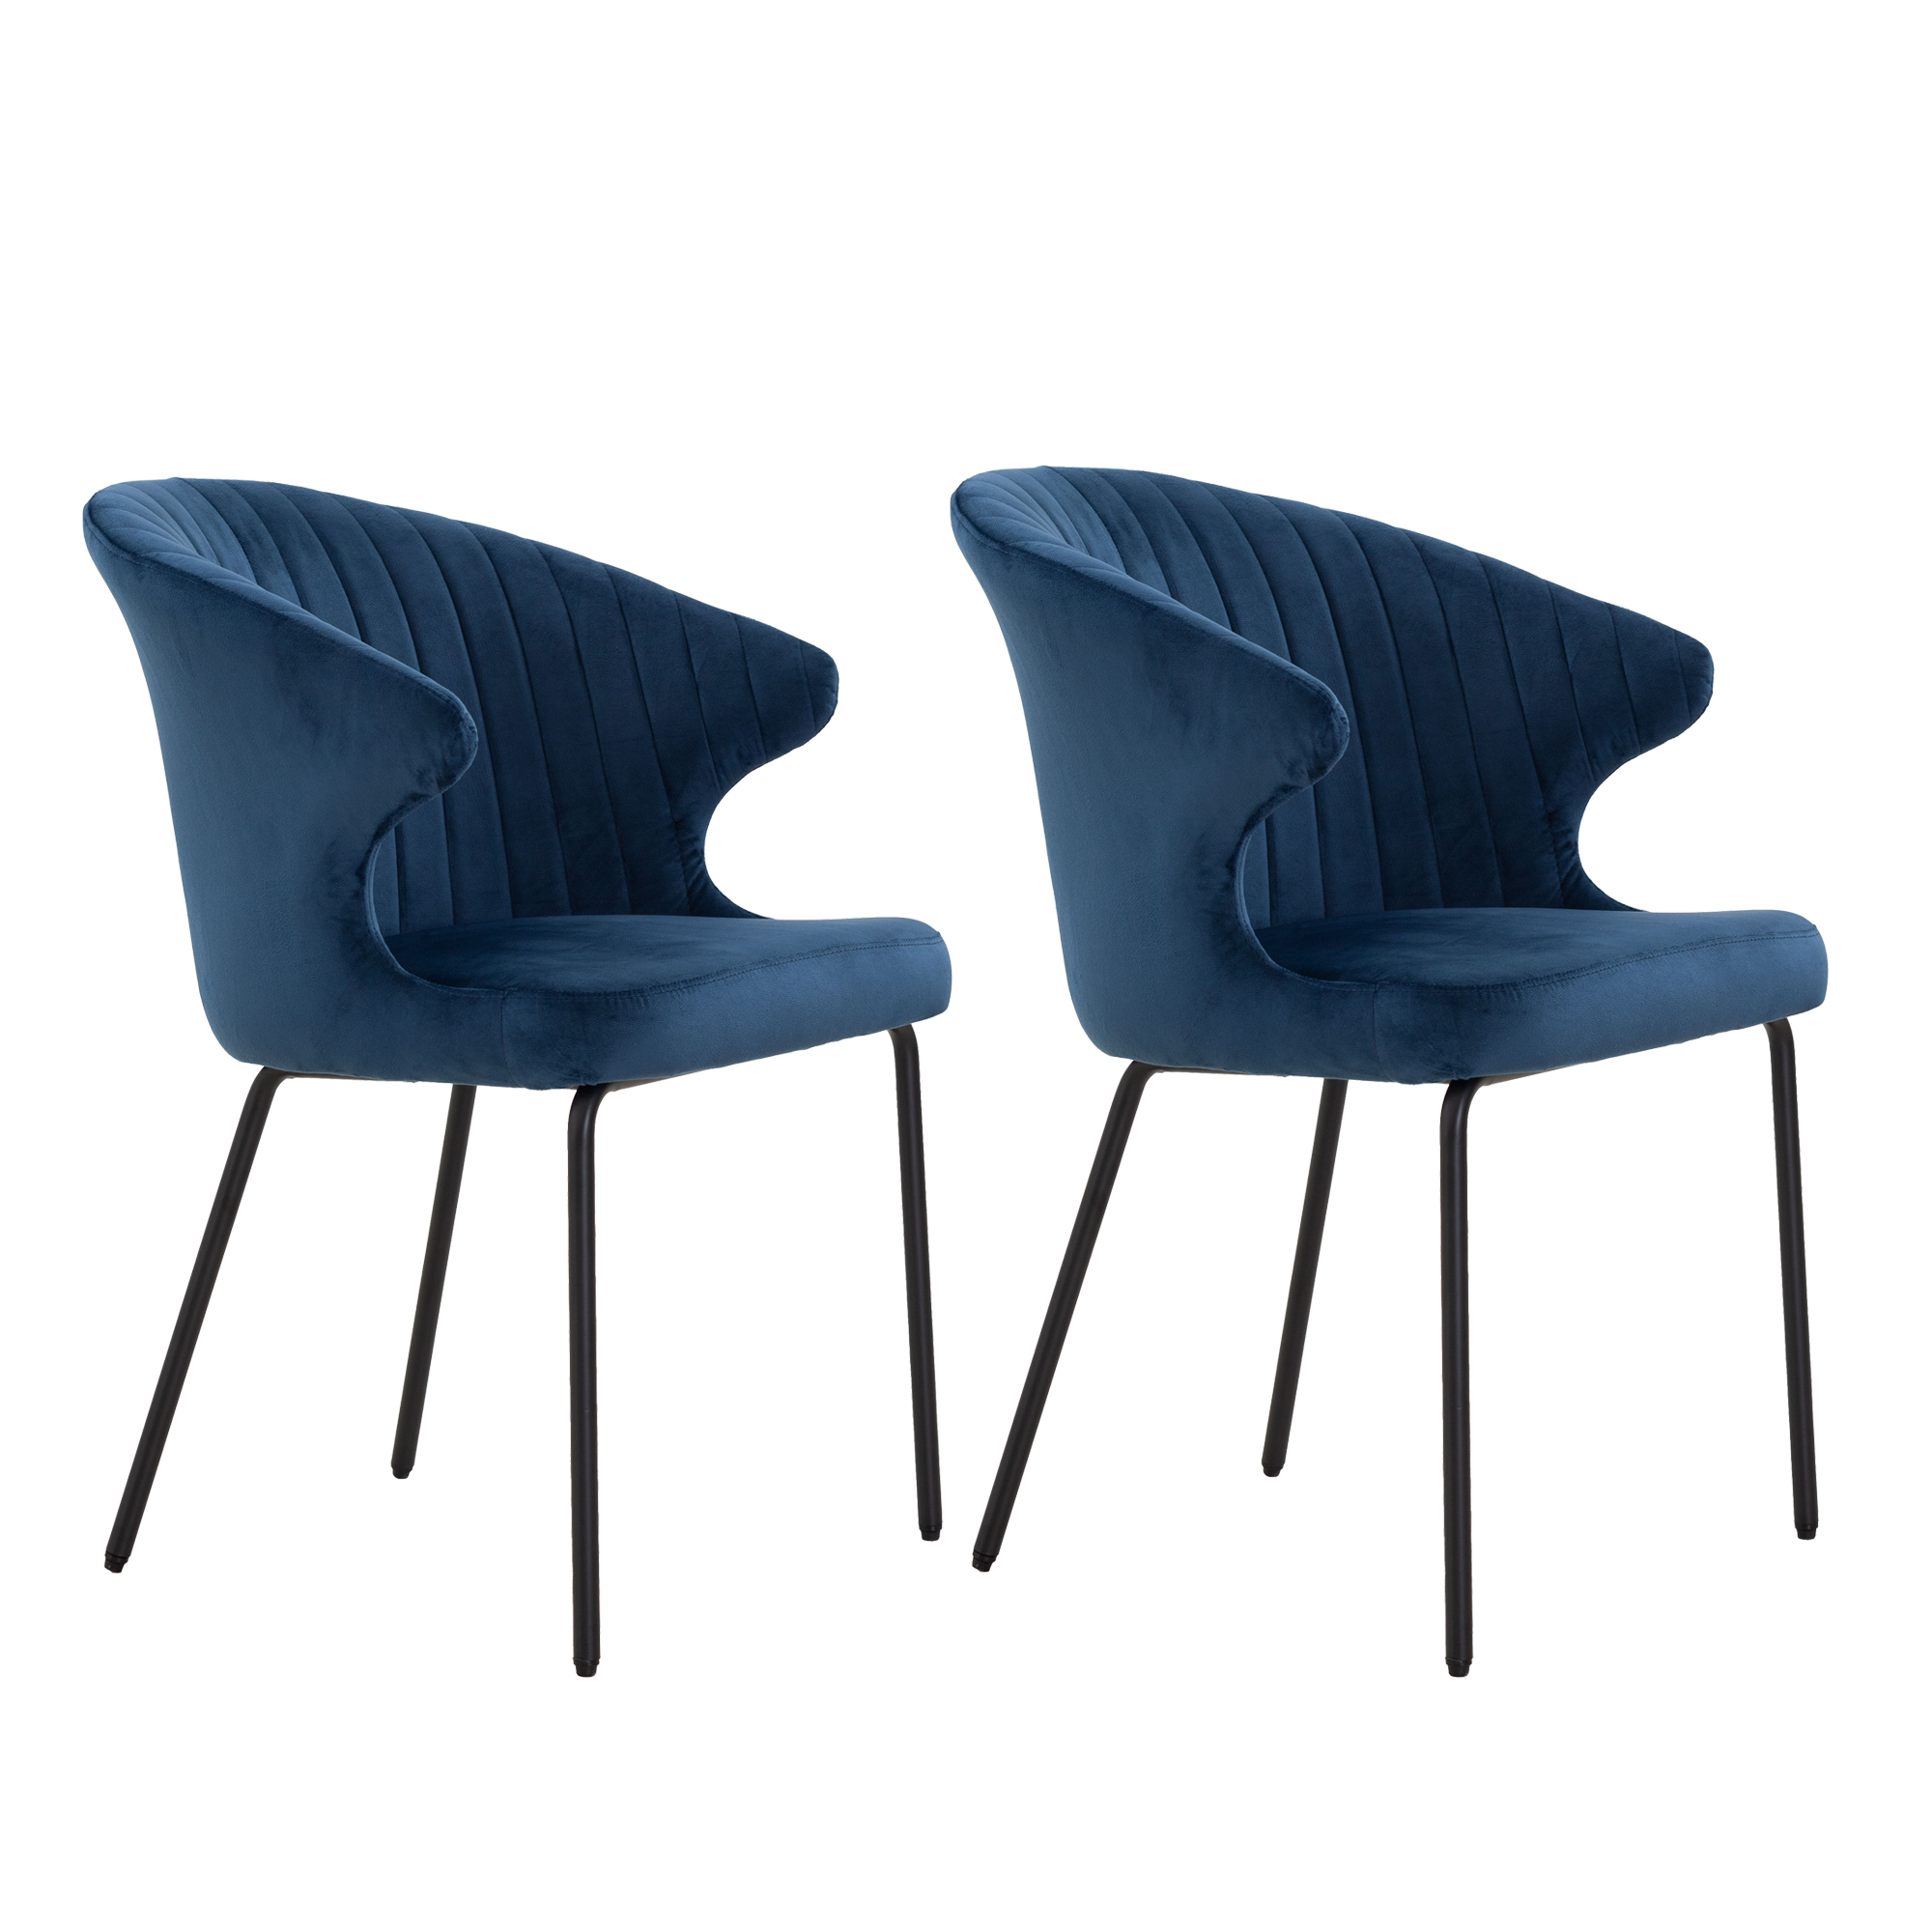 Dining Chairs set of 2, Upholstered Side Chairs, Adjustable Kitchen Chairs Accent Chair Cushion Upholstered Seat with Metal Legs for Living Room Blue